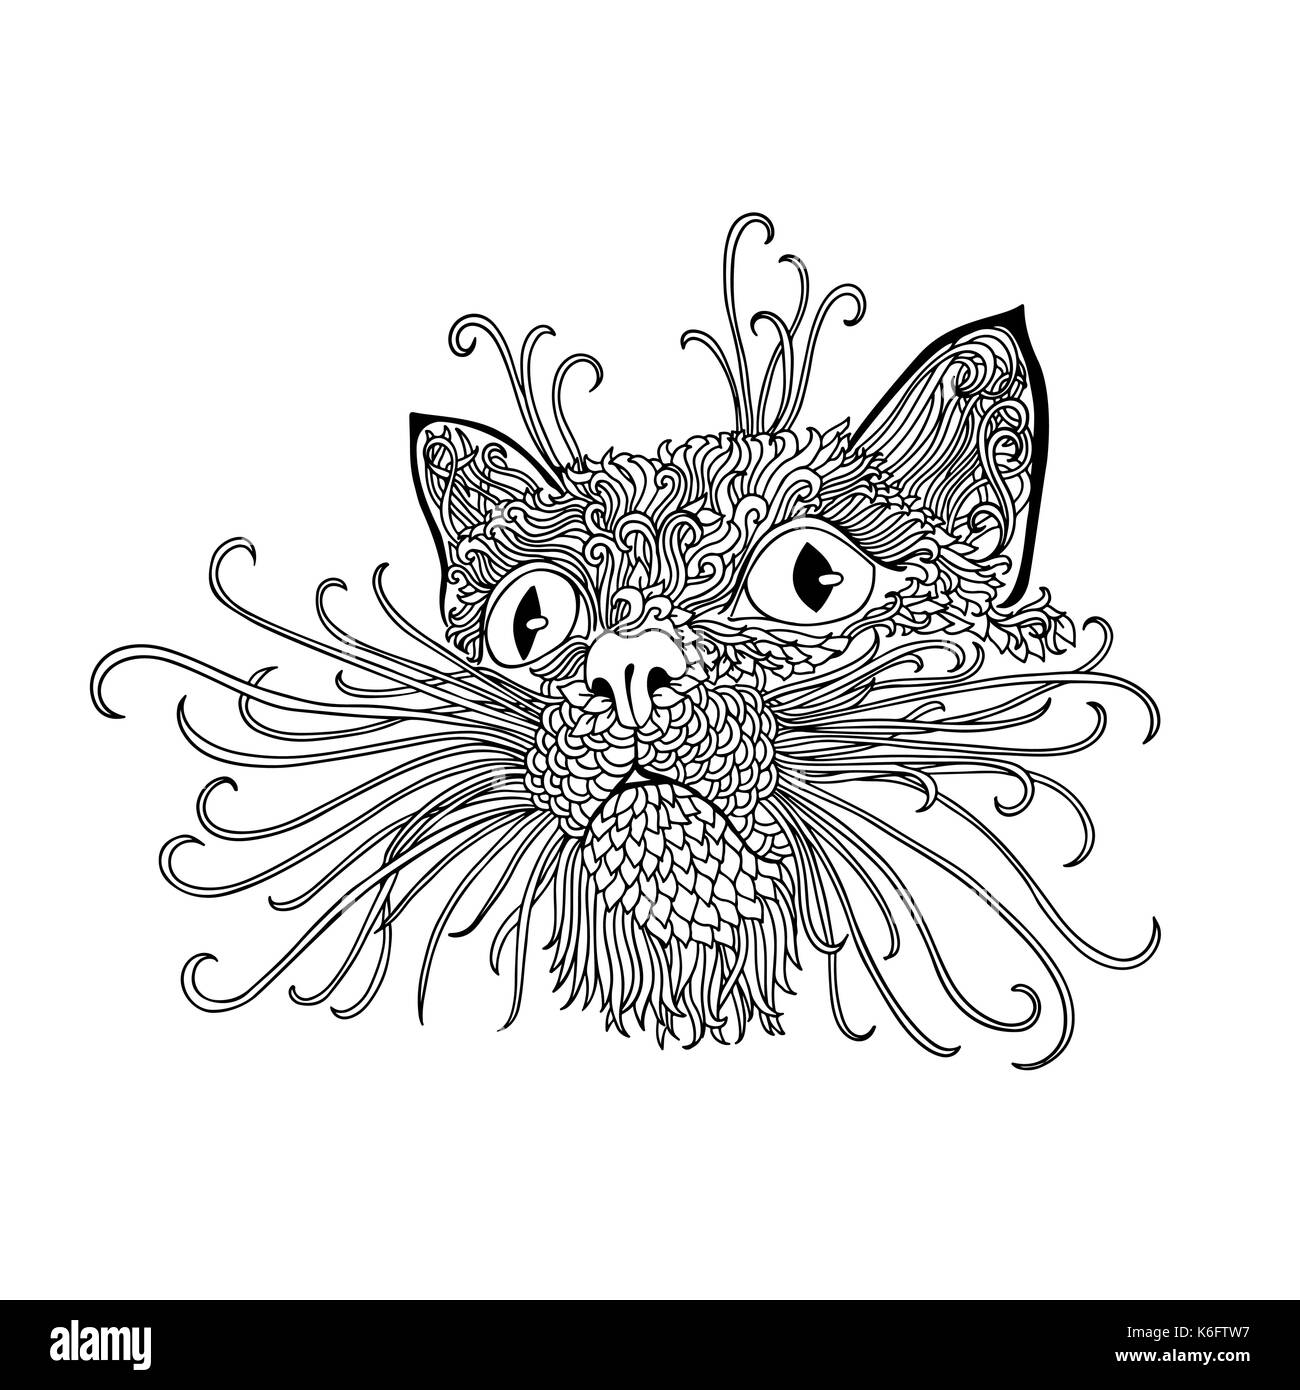 Black and wite cat with ethnic floral ornaments for adult coloring book. Zentagle pattern. Vector doodle illustration. Portrait of a cute pet. Stock Vector